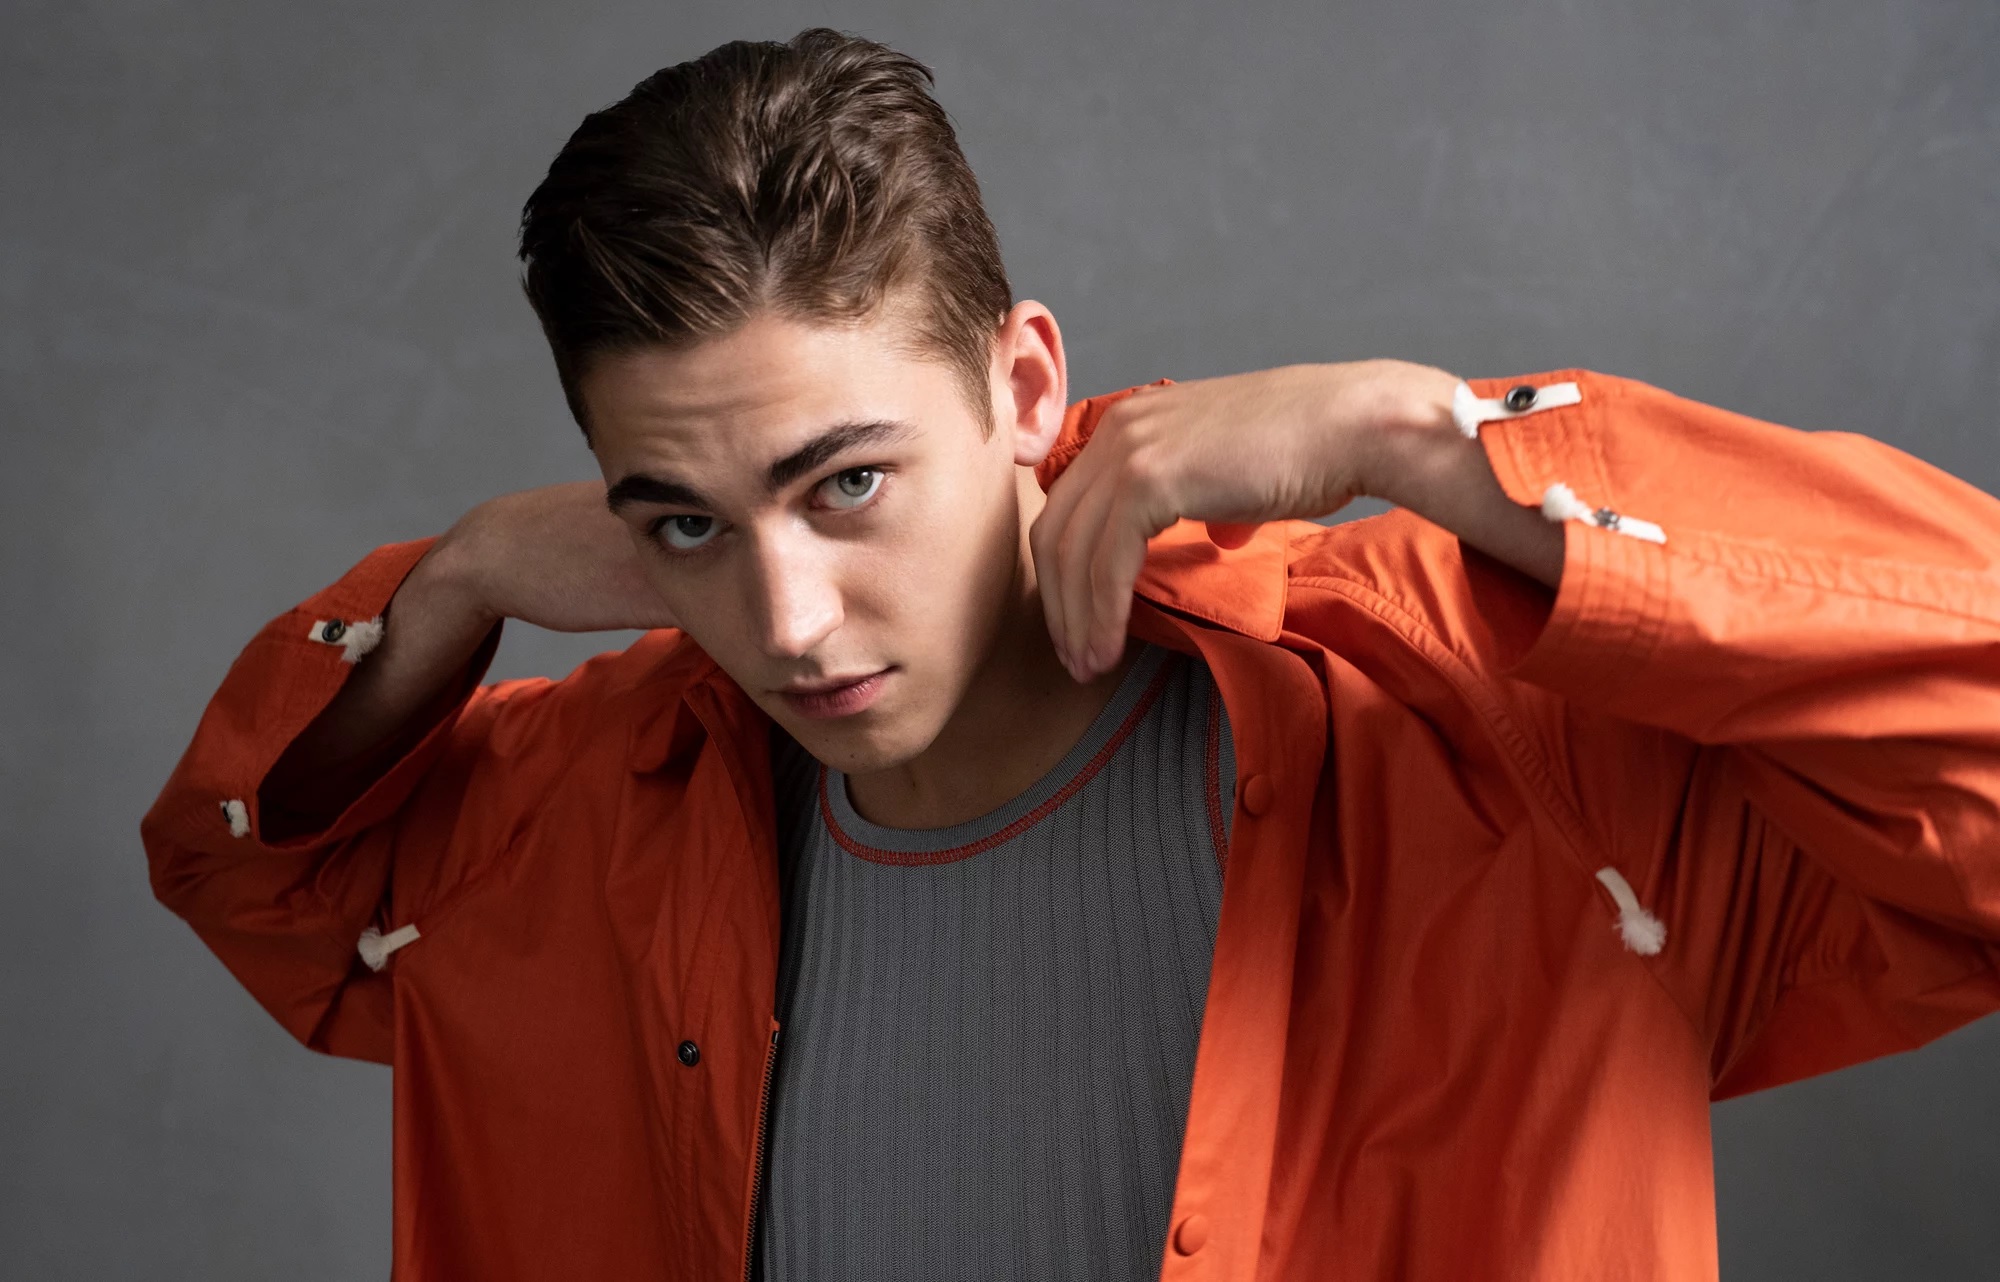 Hero Fiennes-Tiffin is popping his collar to give you a better sniff of his Ferragamo fragrance.